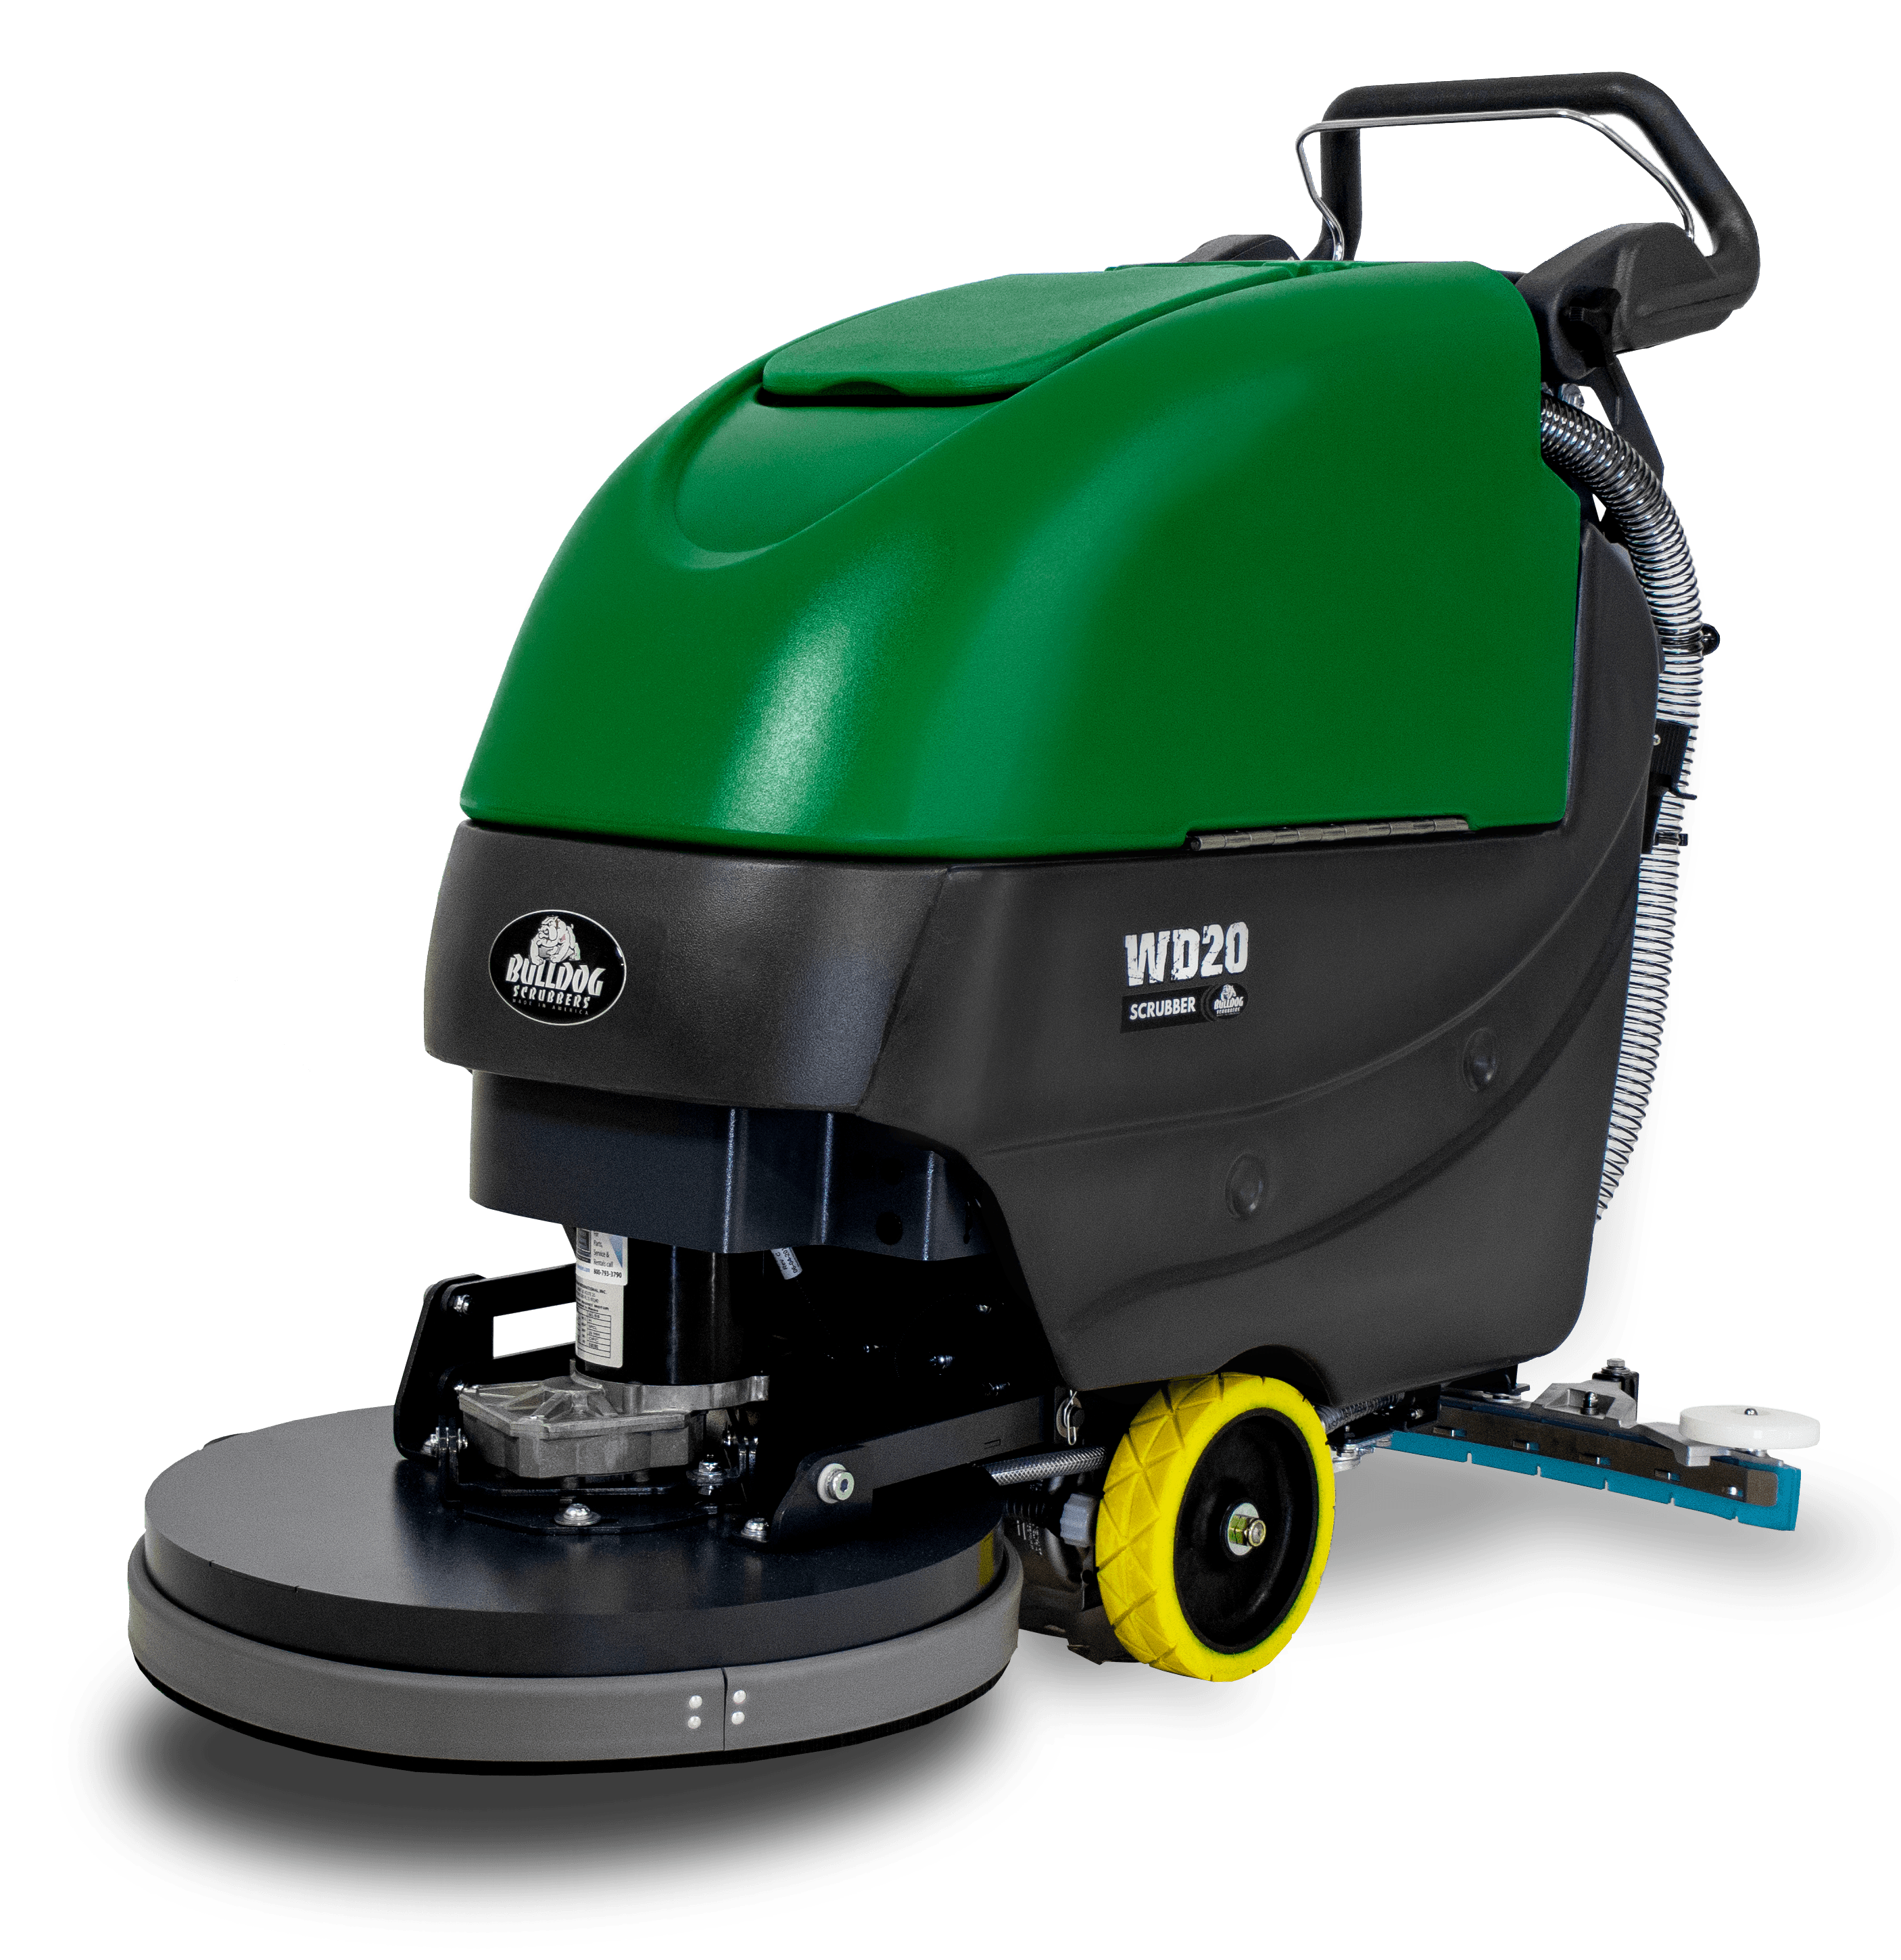 Bulldog WD20 for Cleaning your Brewery Floor